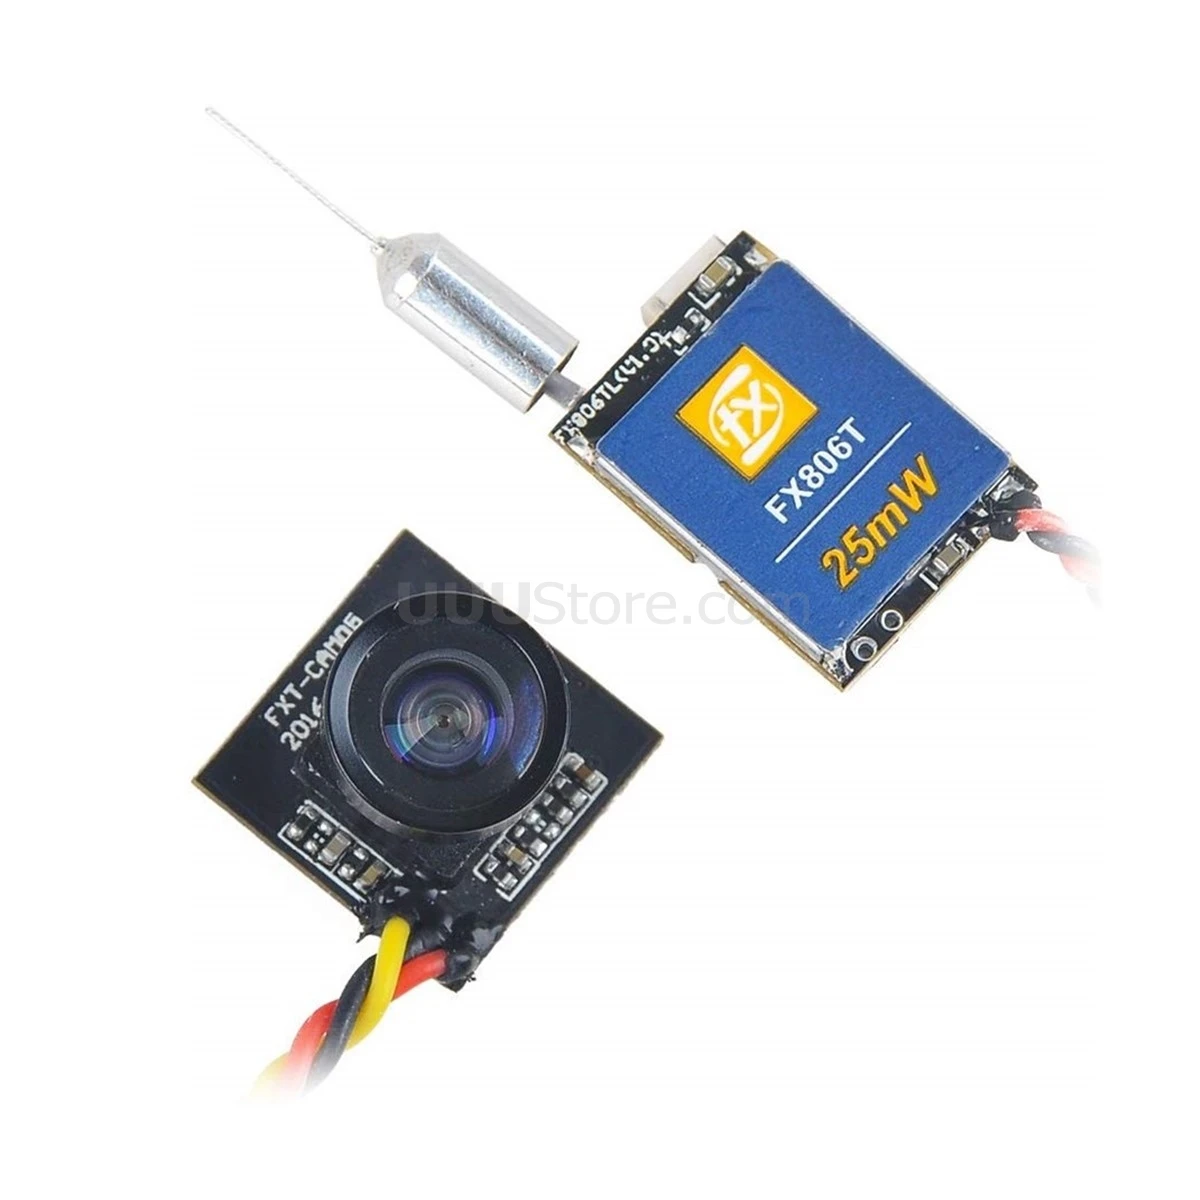 FXT FX806TC 5.8ghz 40Ch Detached VTX and 600TVL Whoop Camera Combo for FPV Racing 3